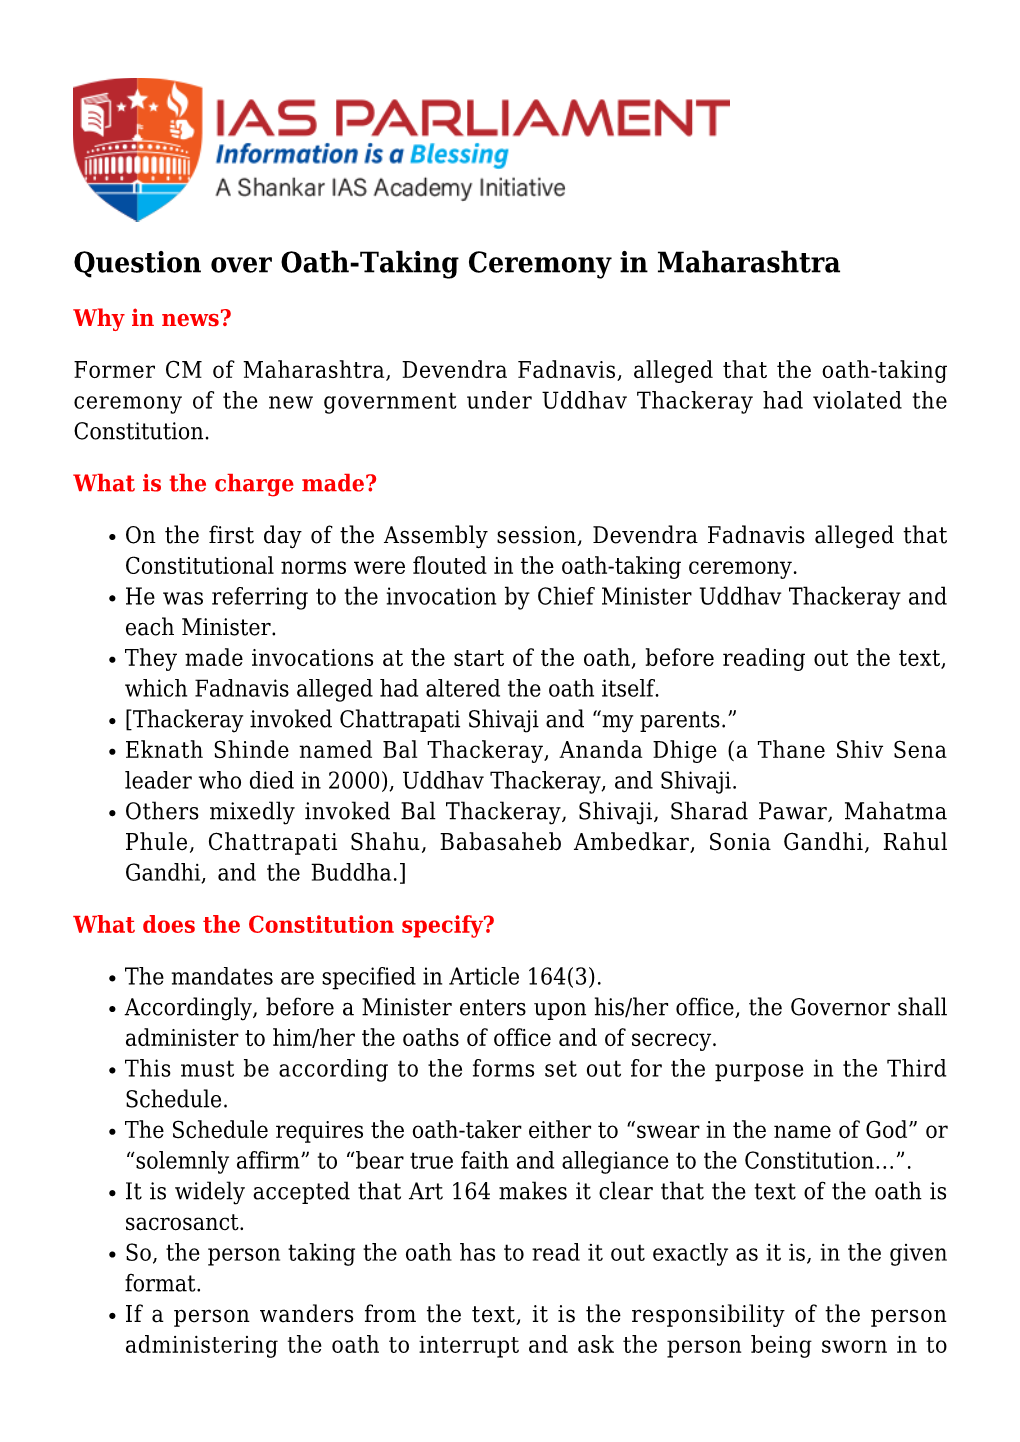 Question Over Oath-Taking Ceremony in Maharashtra